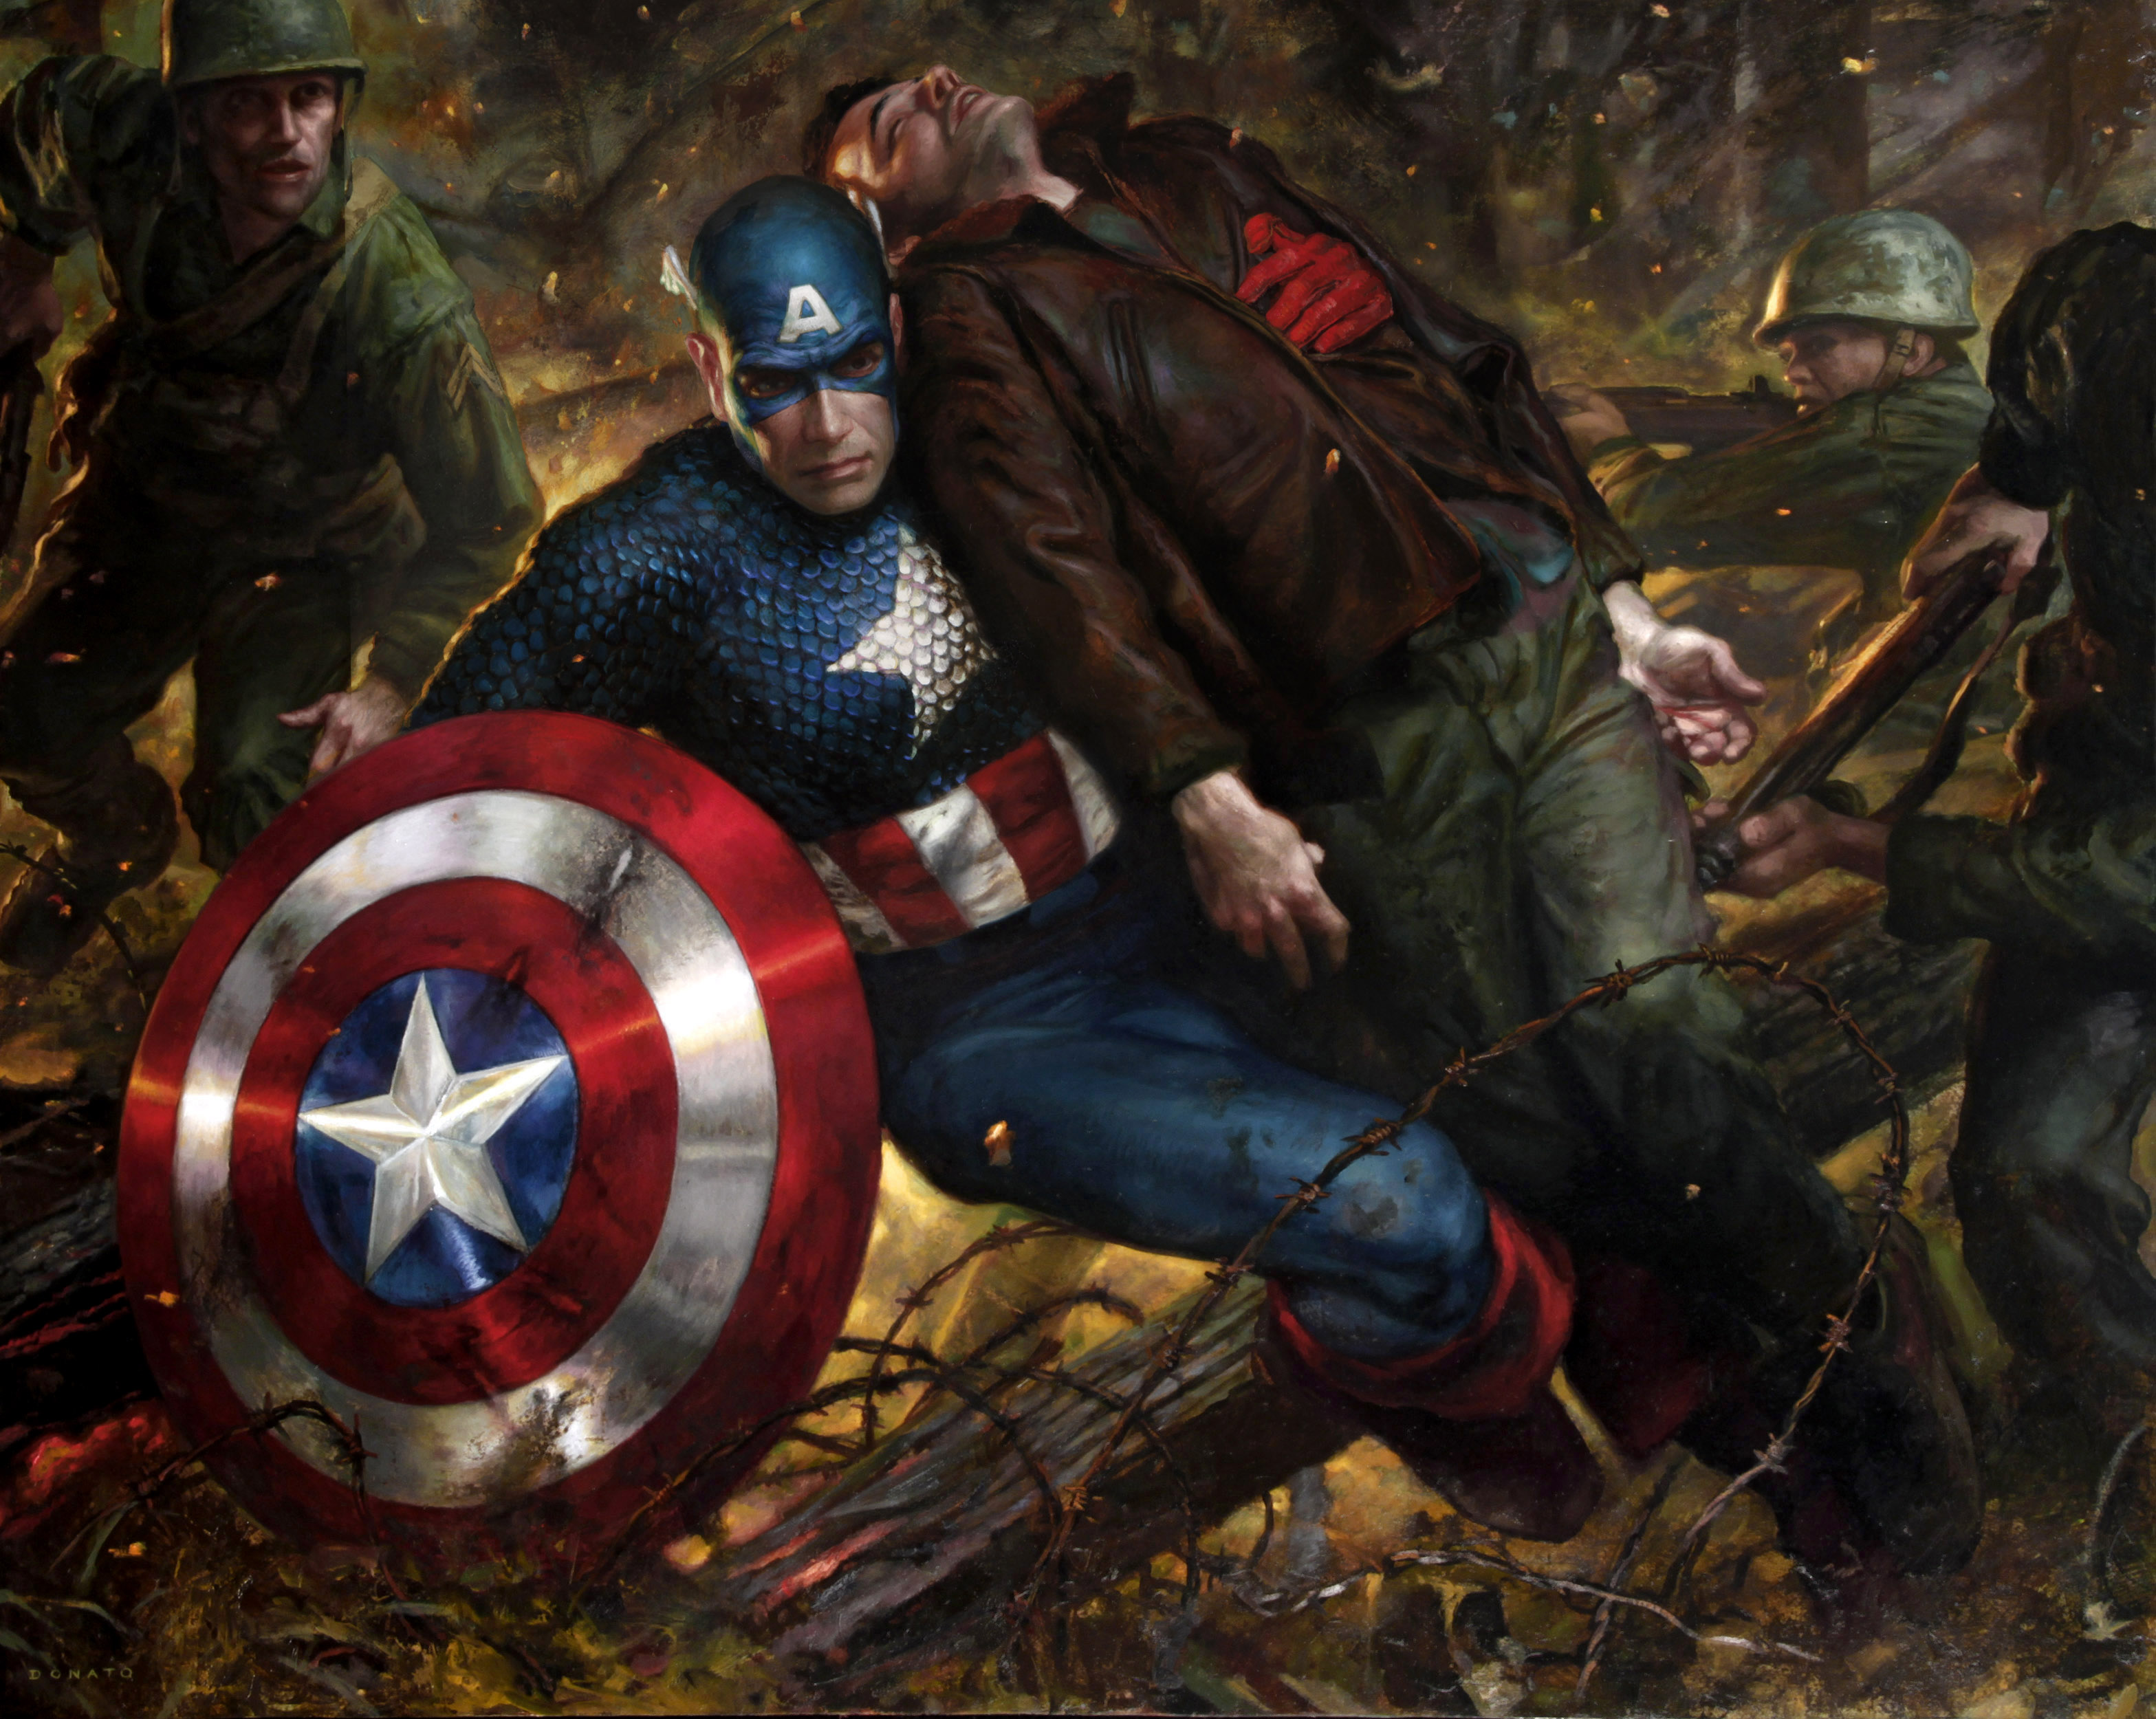 Captain America - Duty
30" x 40"  Oil on Panel 2011
collection of Rox and Cat Conrad